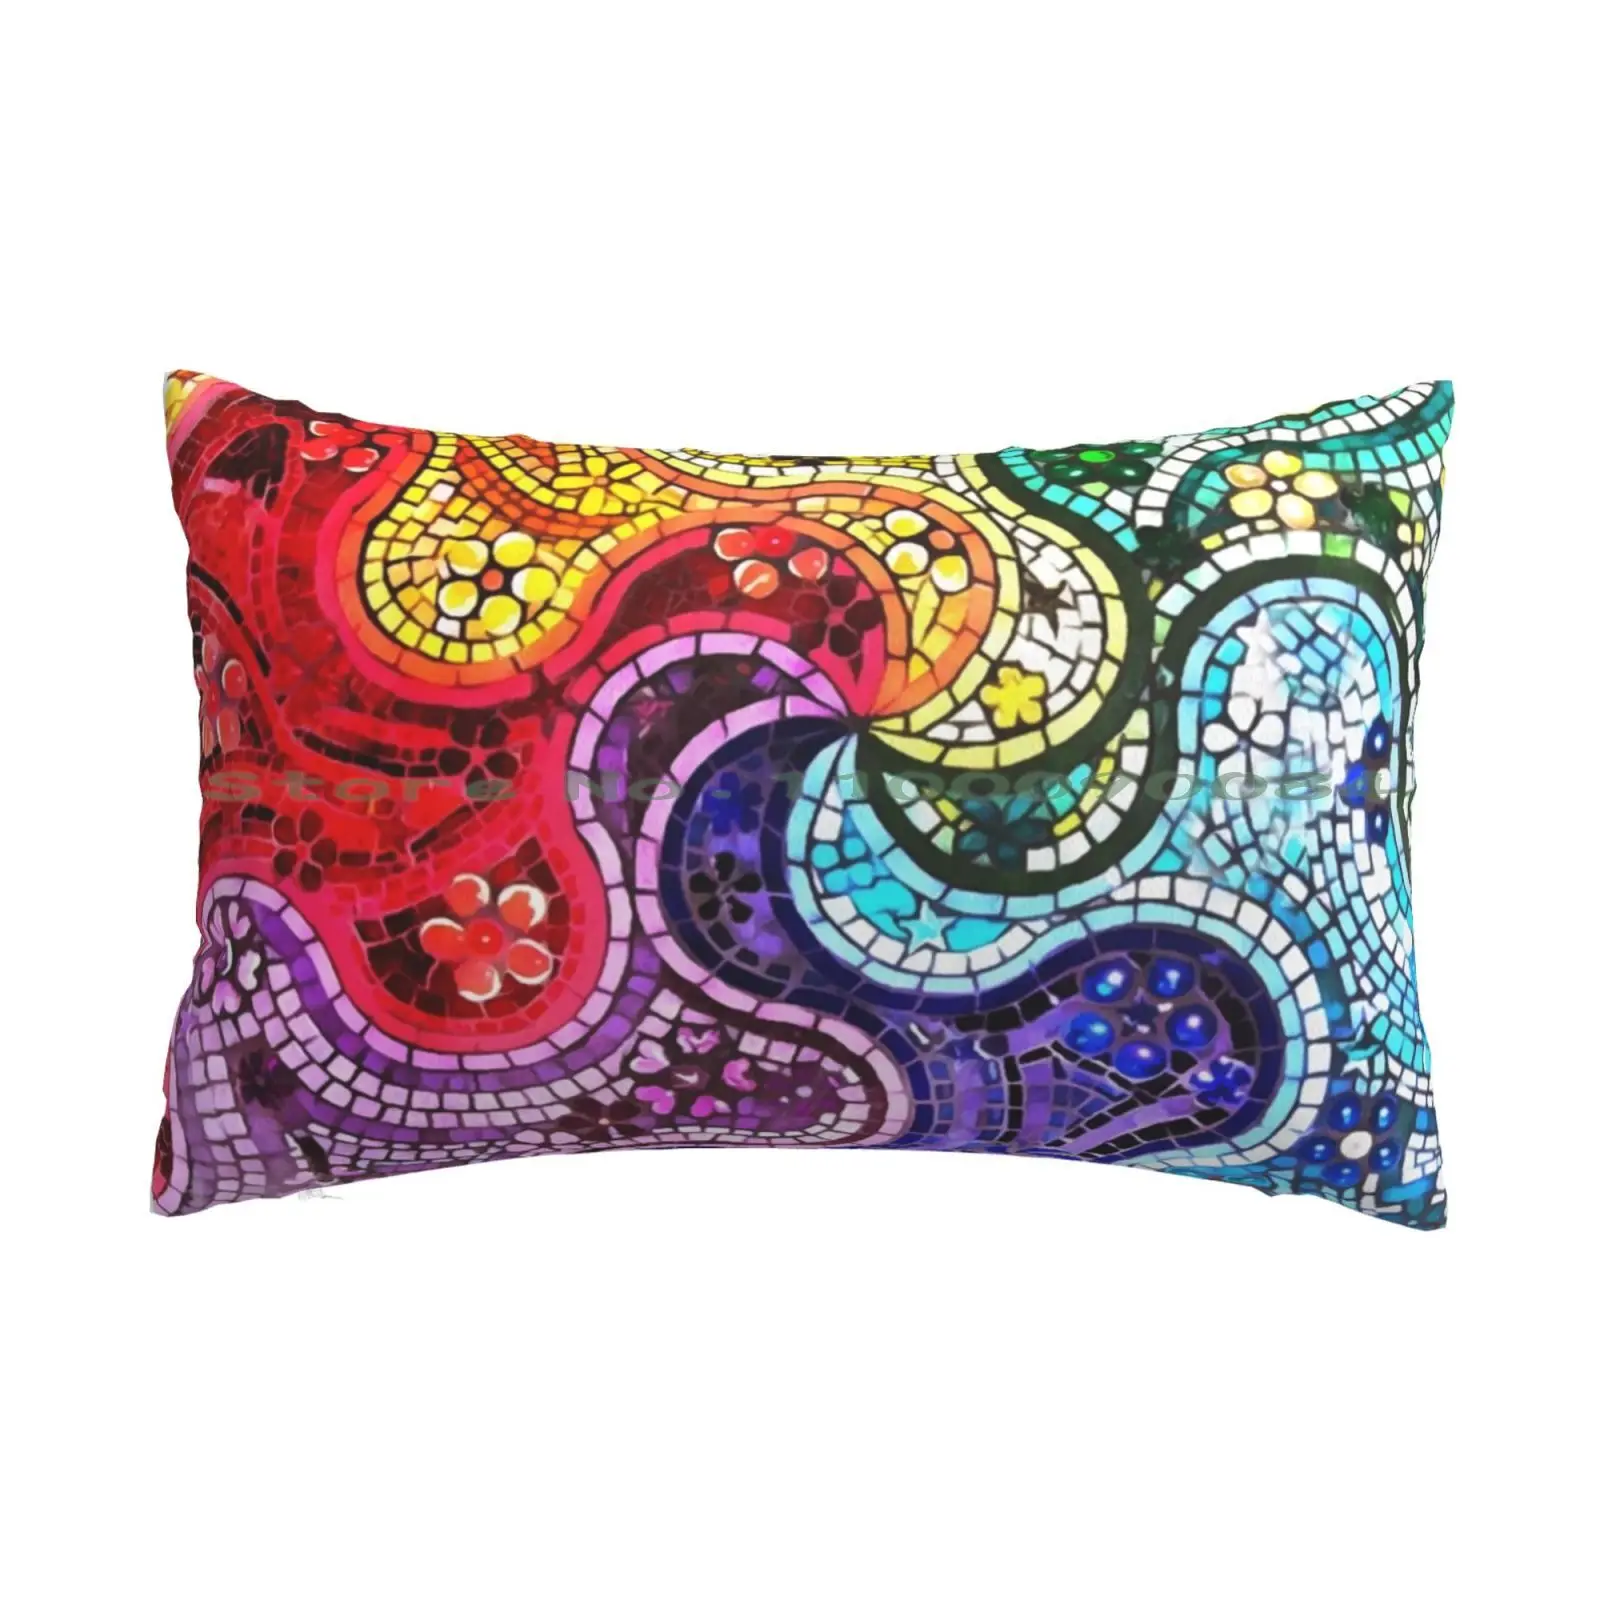 

Barselona Mosaic Pillow Case 20x30 50*75 Sofa Bedroom Colourful Colours Collage Bright Spanish Mix Patterns Stripes Squares